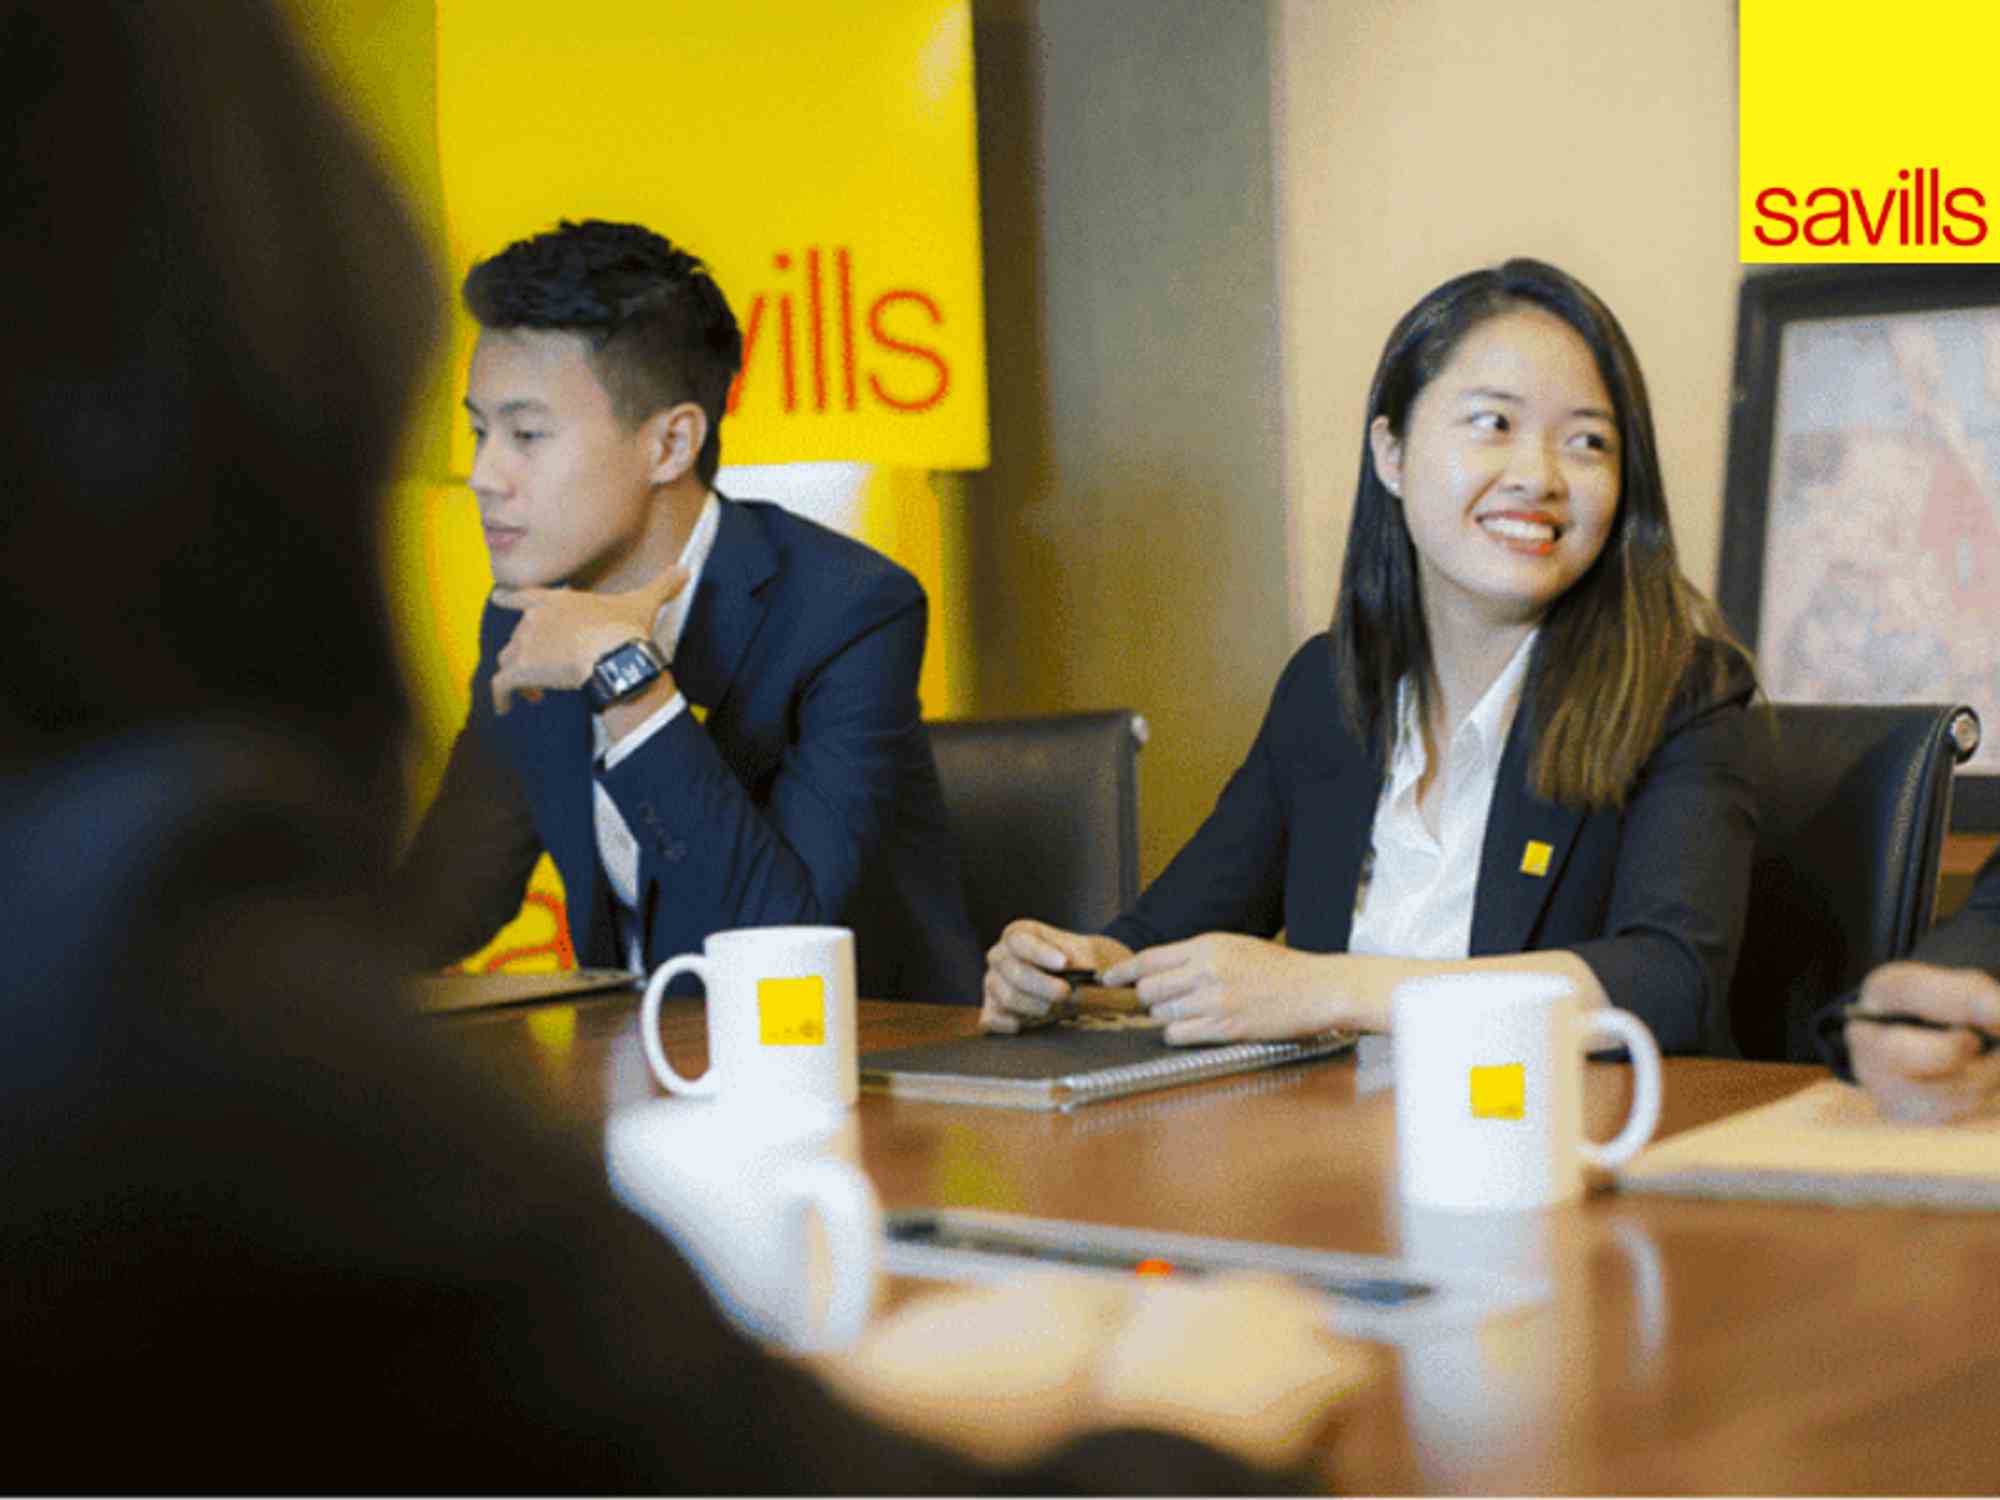 Savills Vietnam - An industrial real estate corporation that specializes in high-quality warehouse leasing solutions.